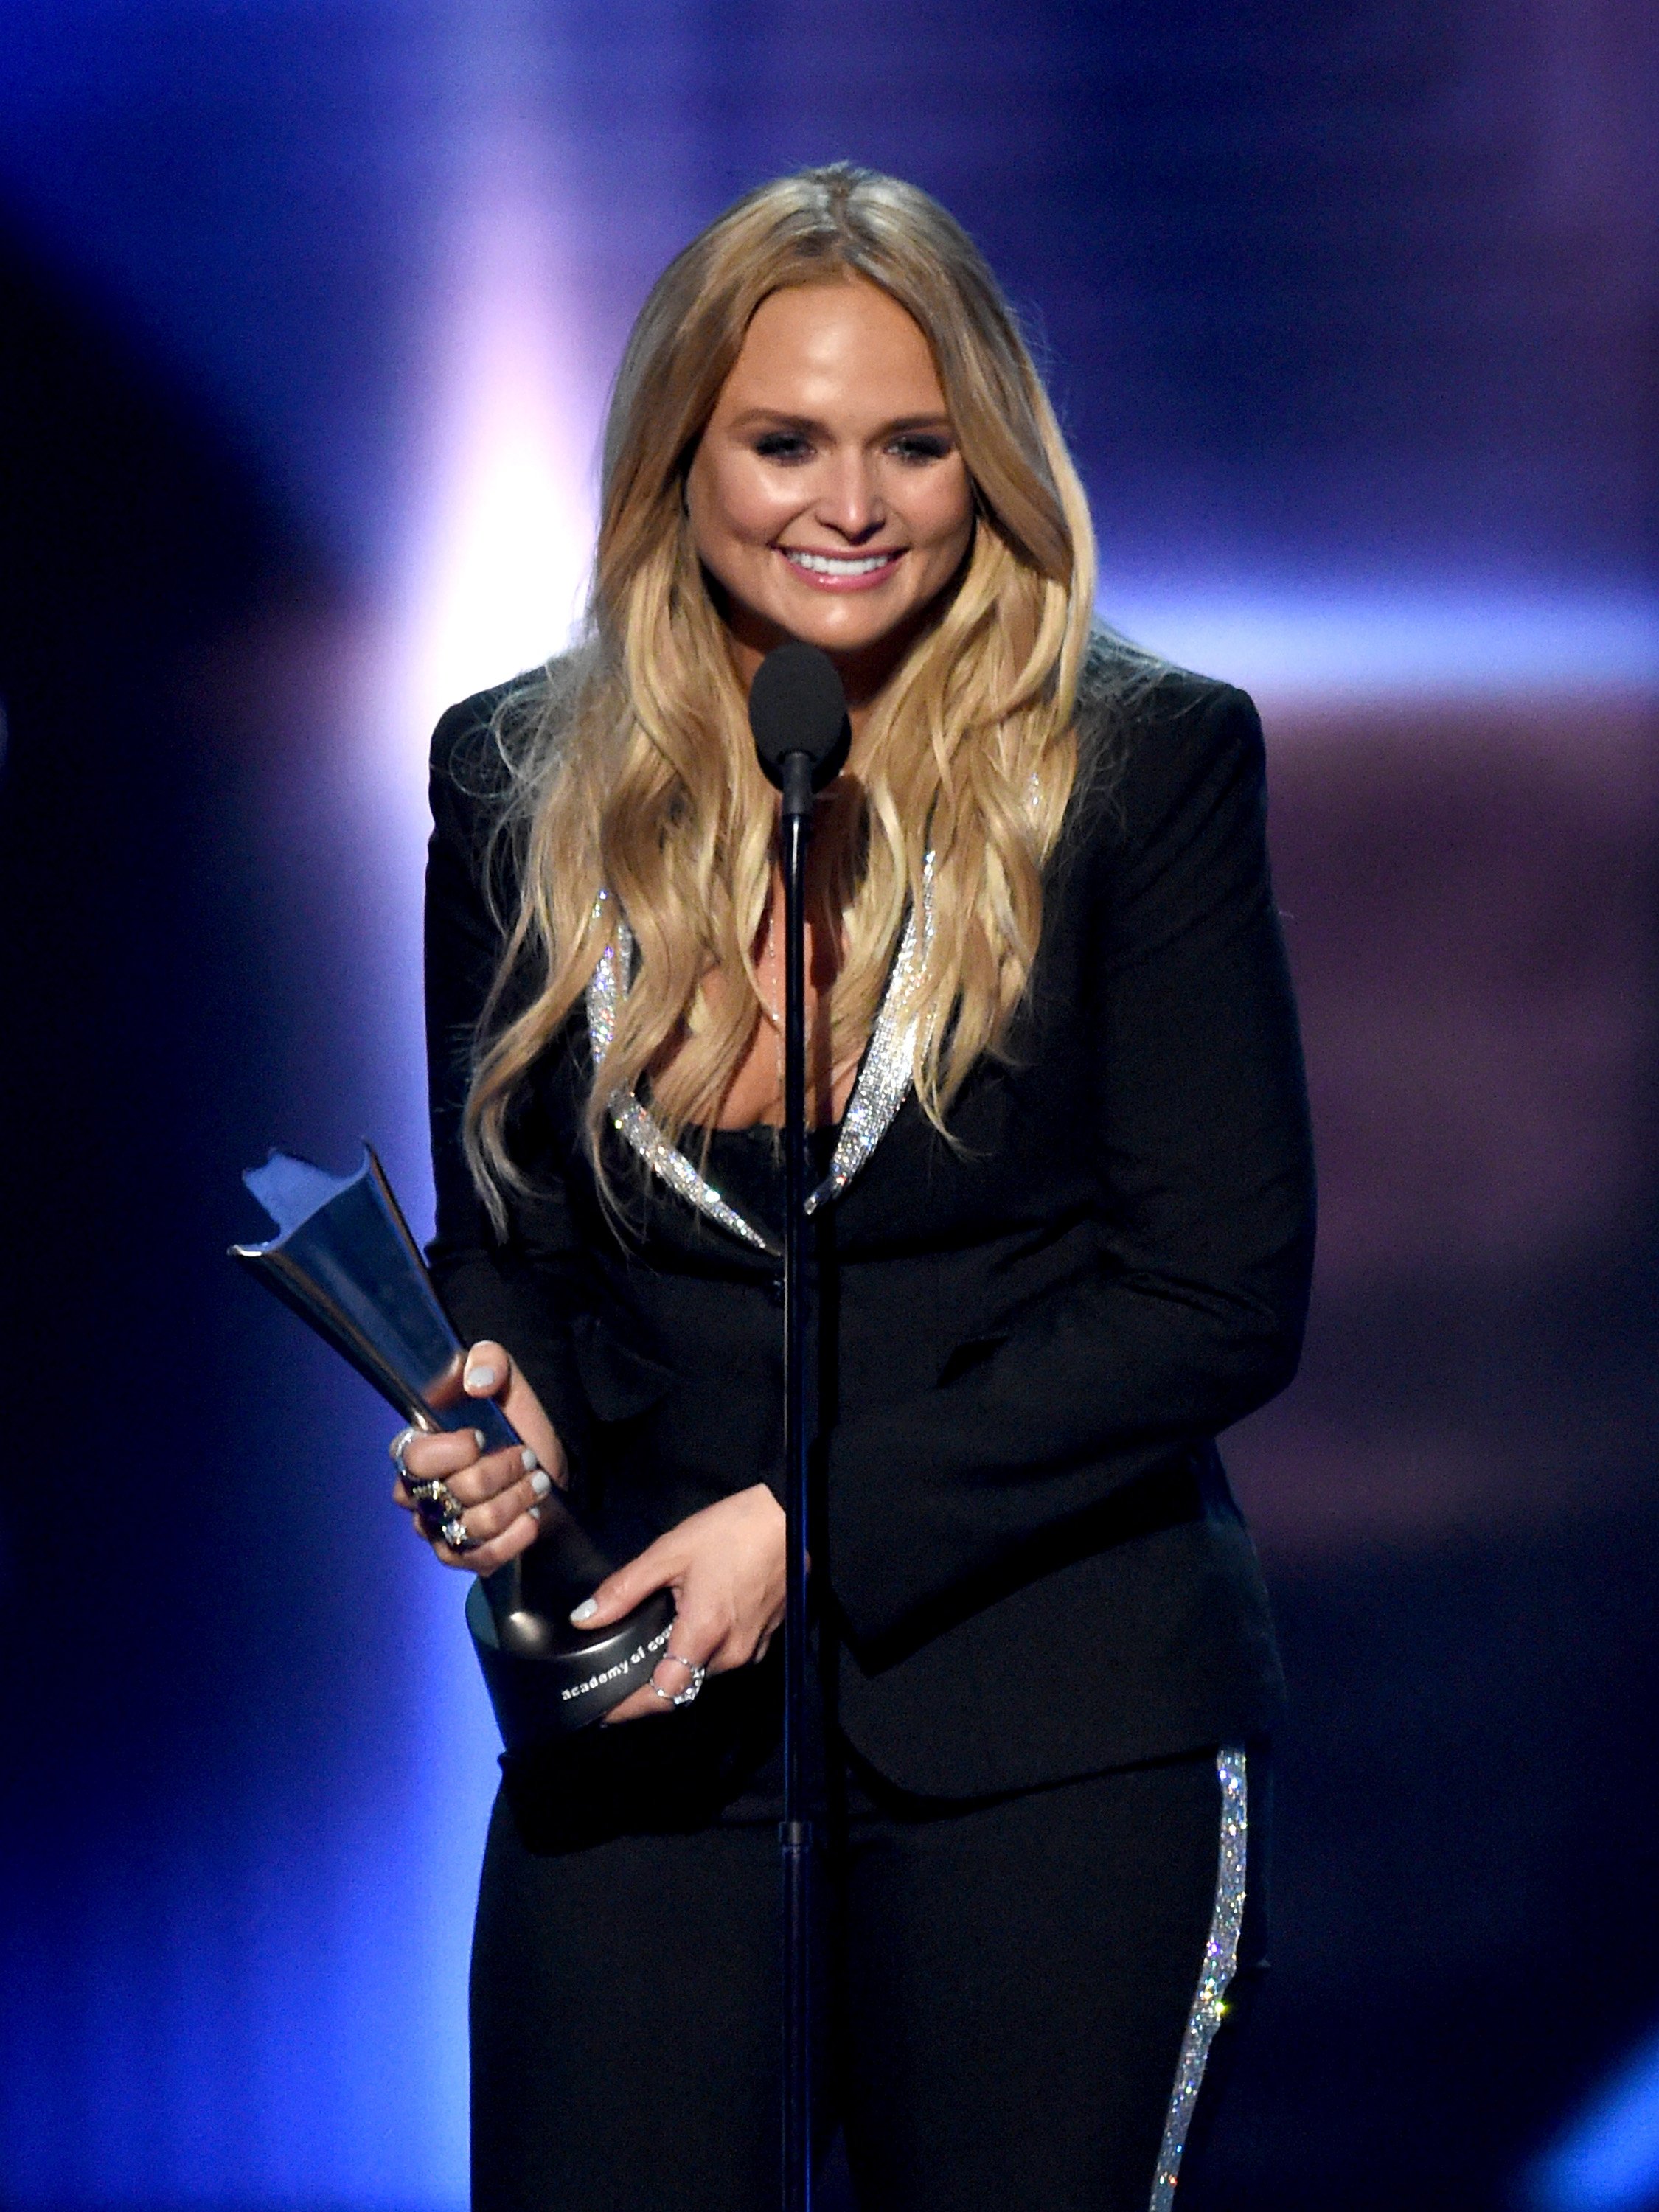 Miranda Lambert accepts the Album of the Year award for 'The Weight of These Wings' onstage during the 52nd Academy Of Country Music Awards at T-Mobile Arena on April 2, 2017 in Las Vegas